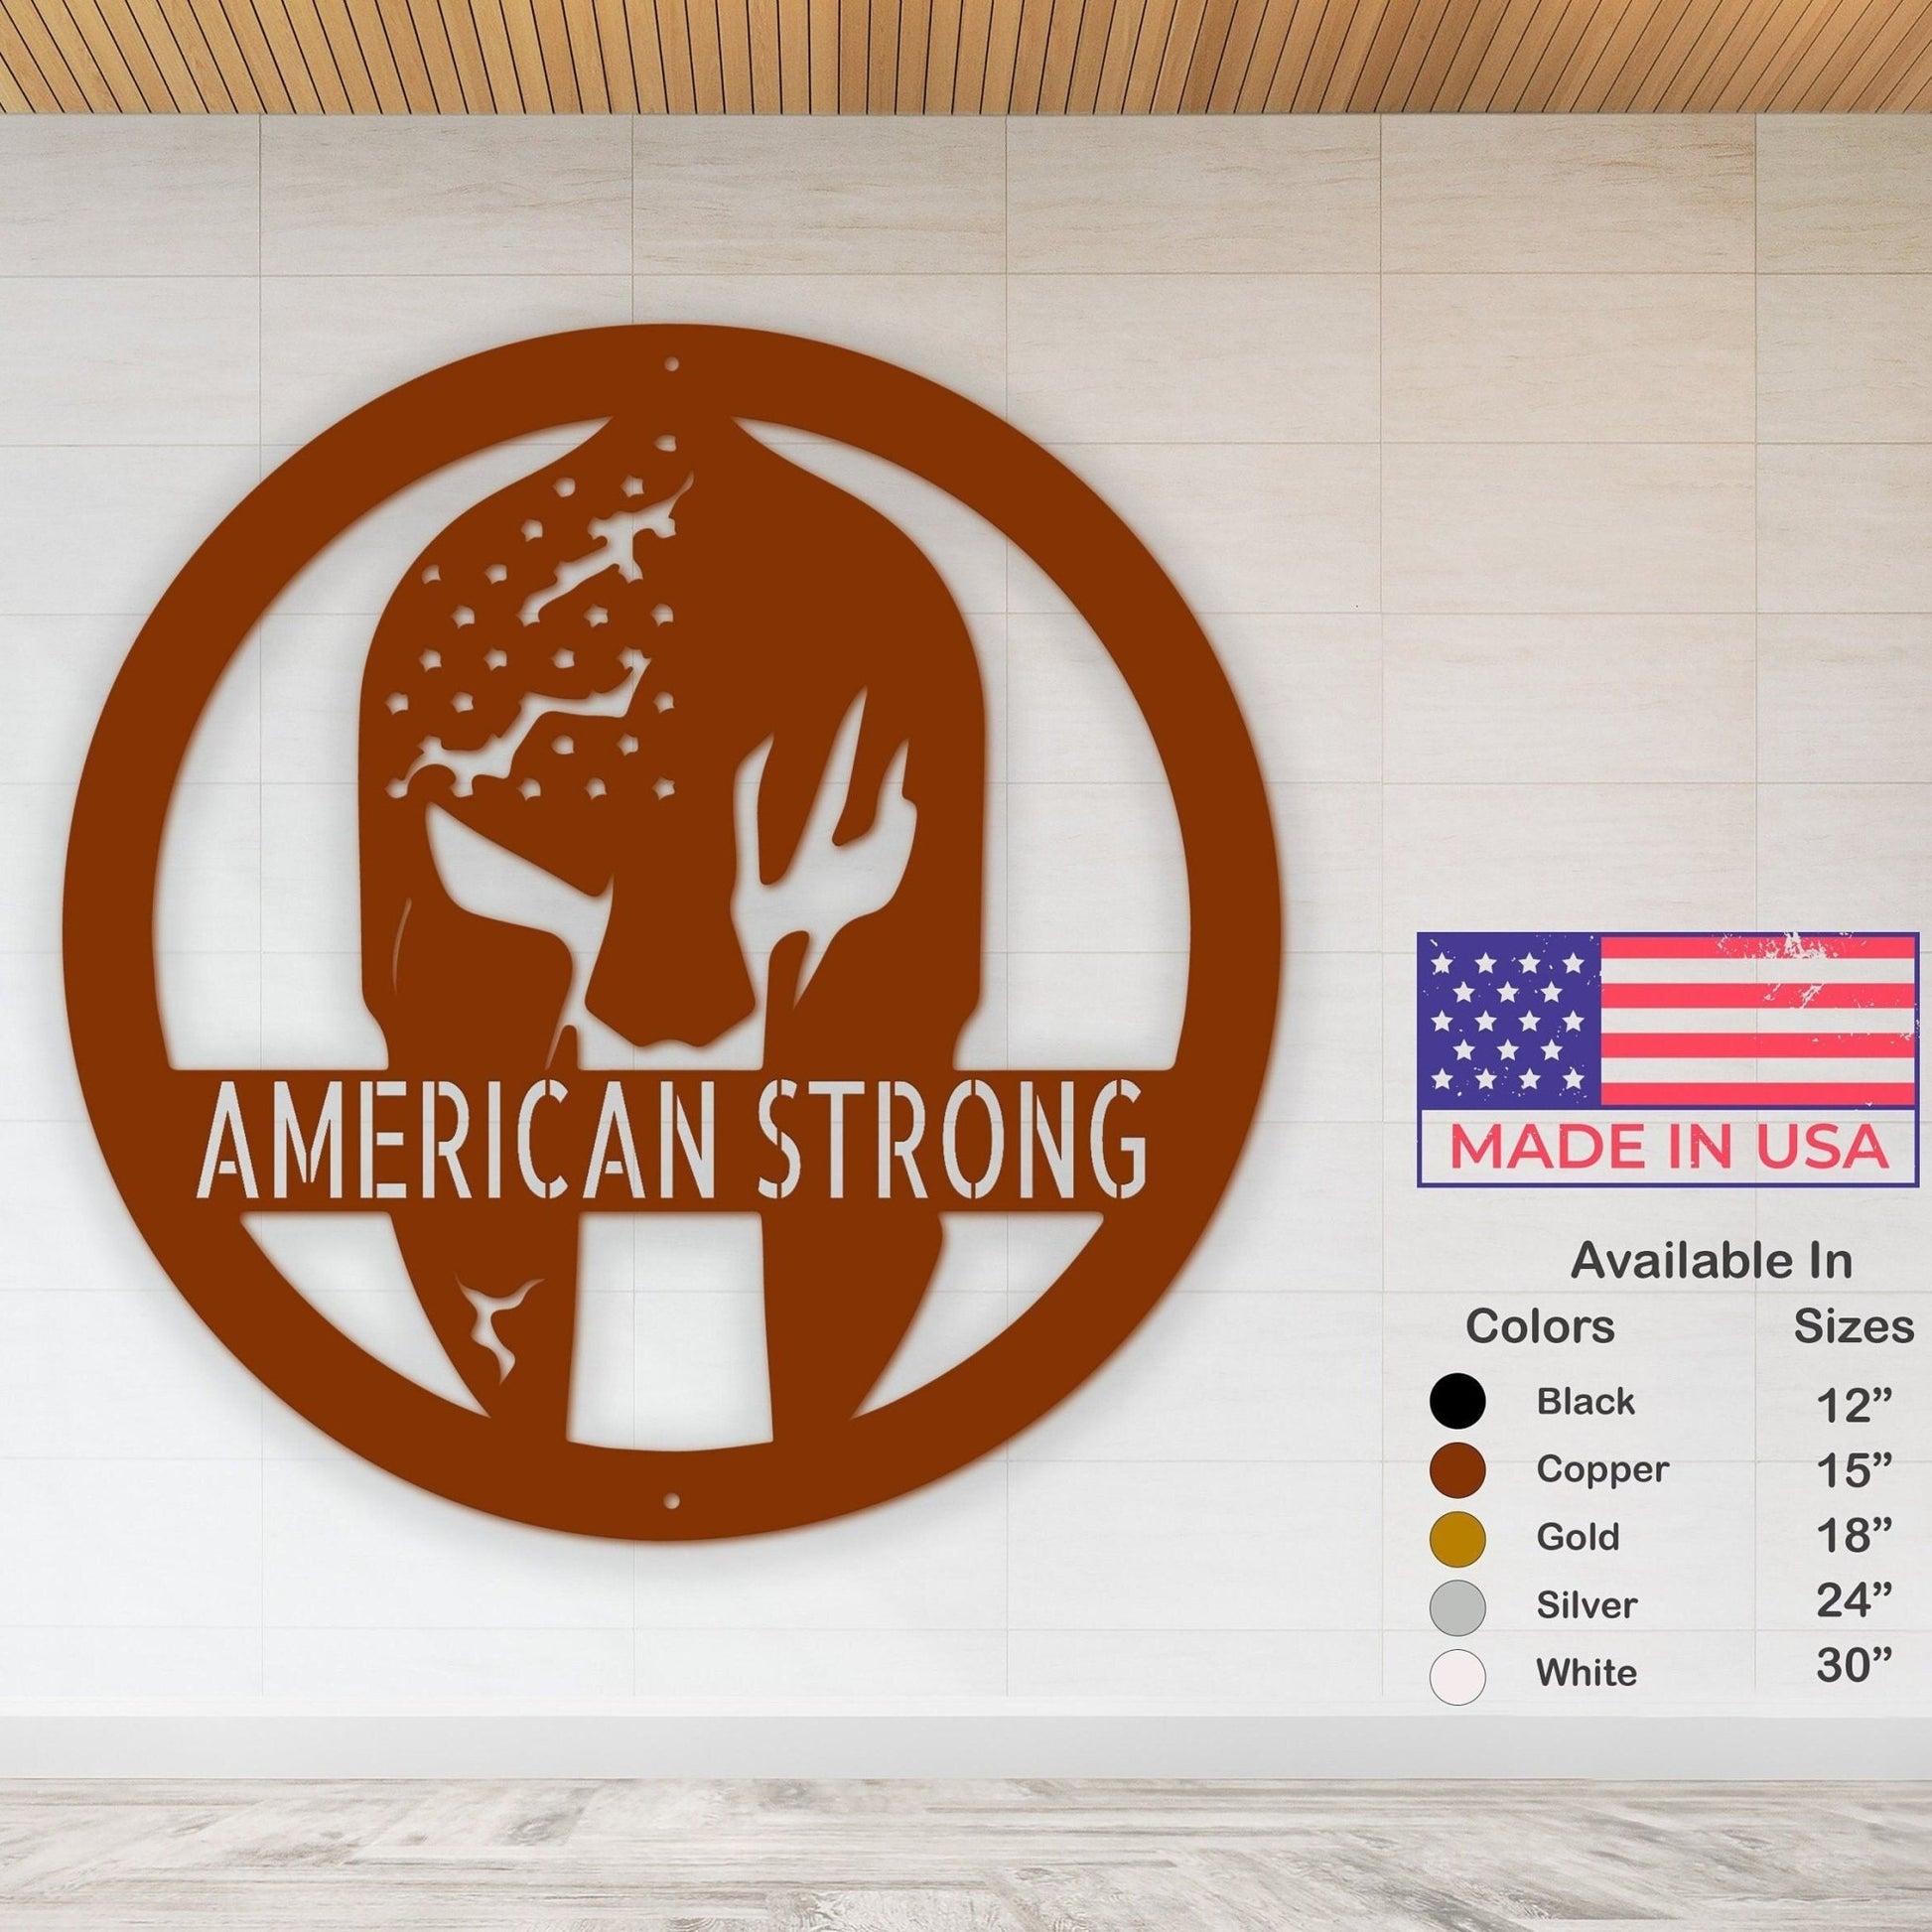 Spartan Wall Art - Patriotic Metal Sign for Police Officers and Patriotic Decor - Stylinsoul